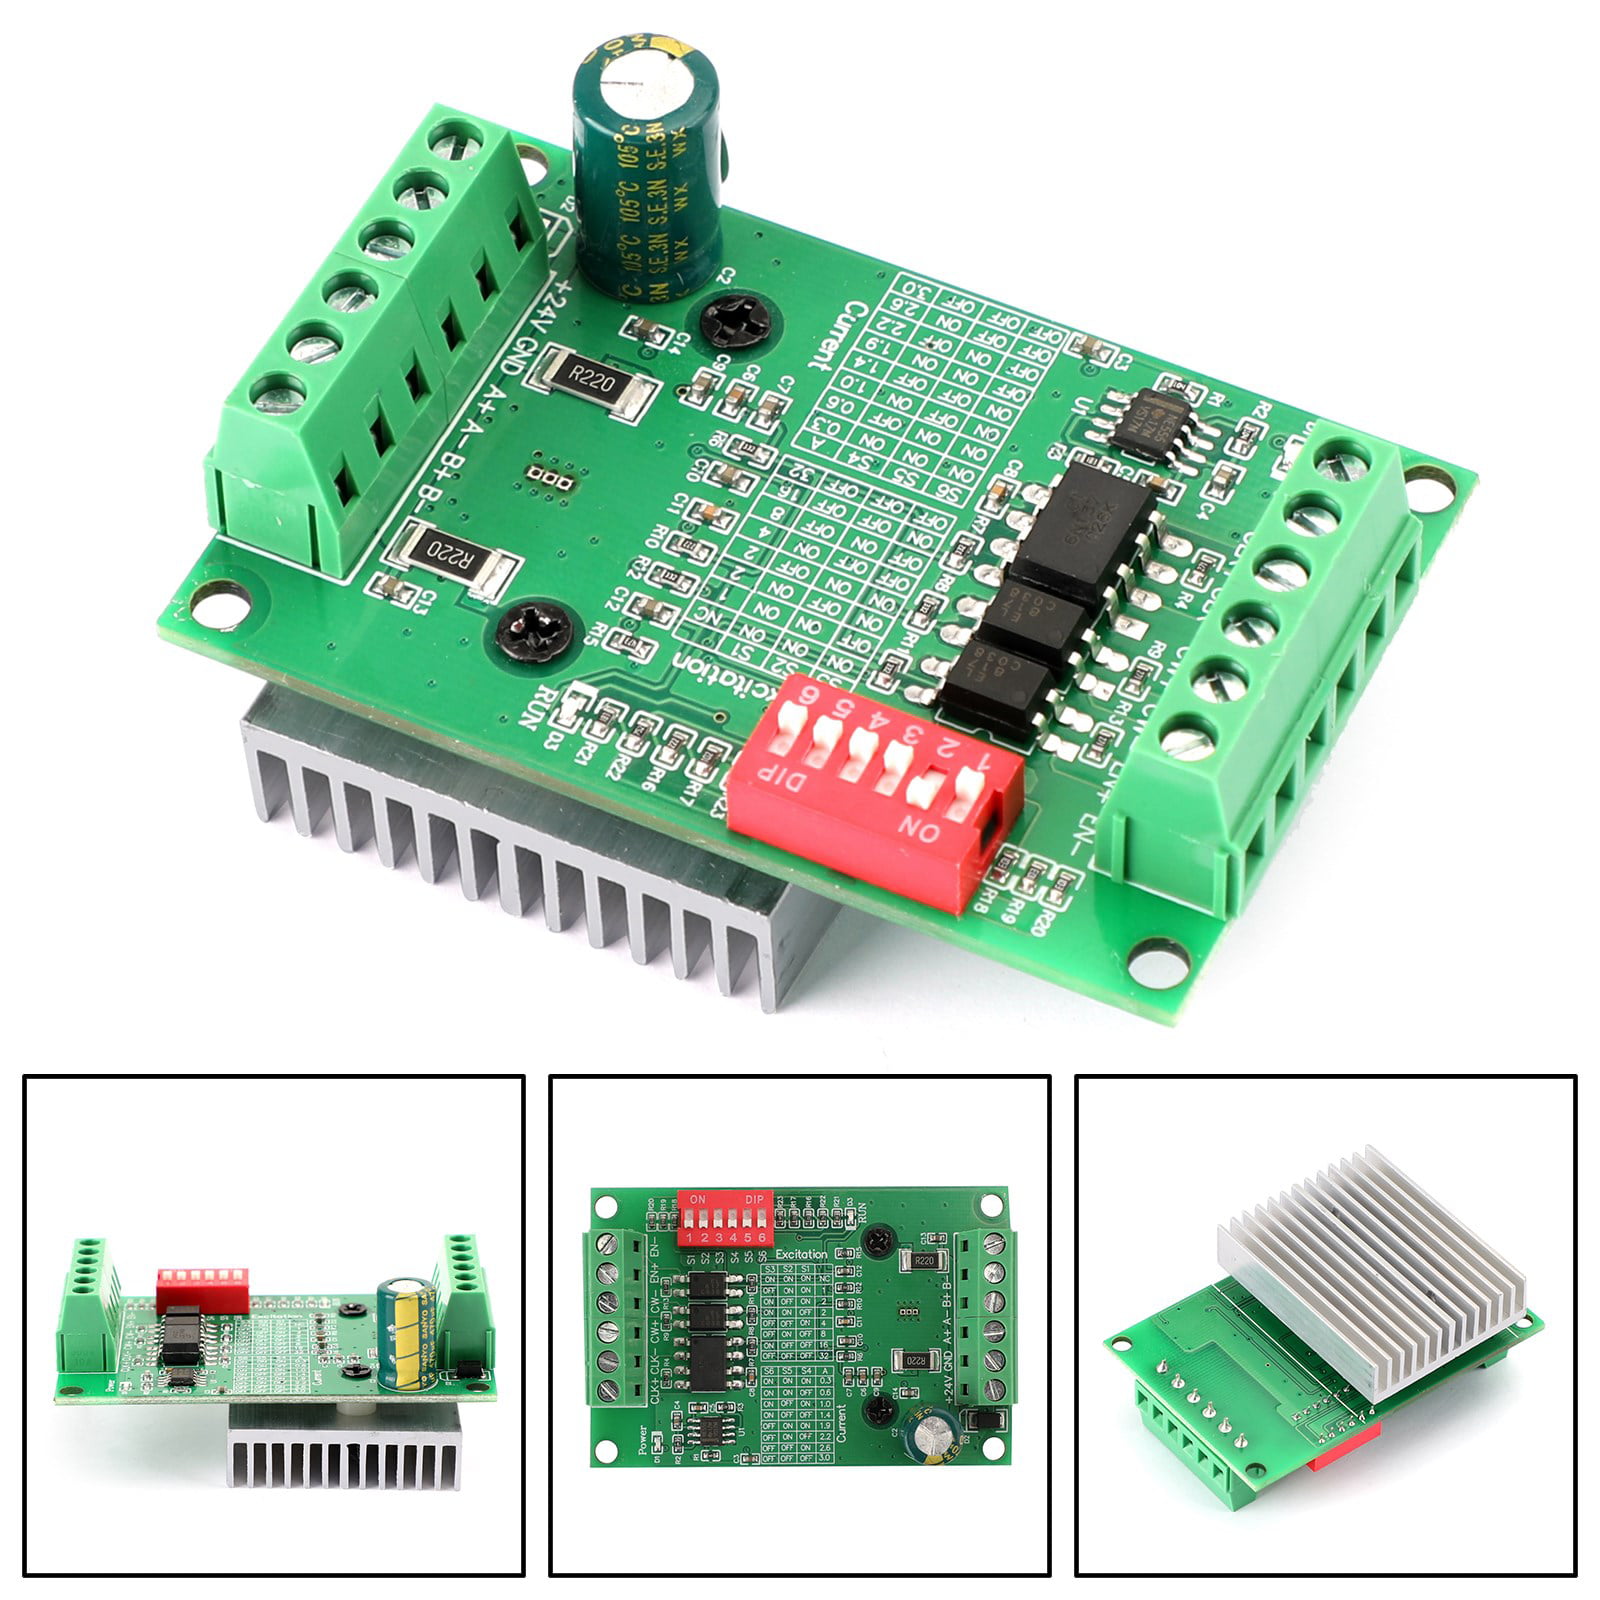 TB6560 3A 10-35V Driver Board CNC Router 1 Axis Controller Stepper Motor Drivers 